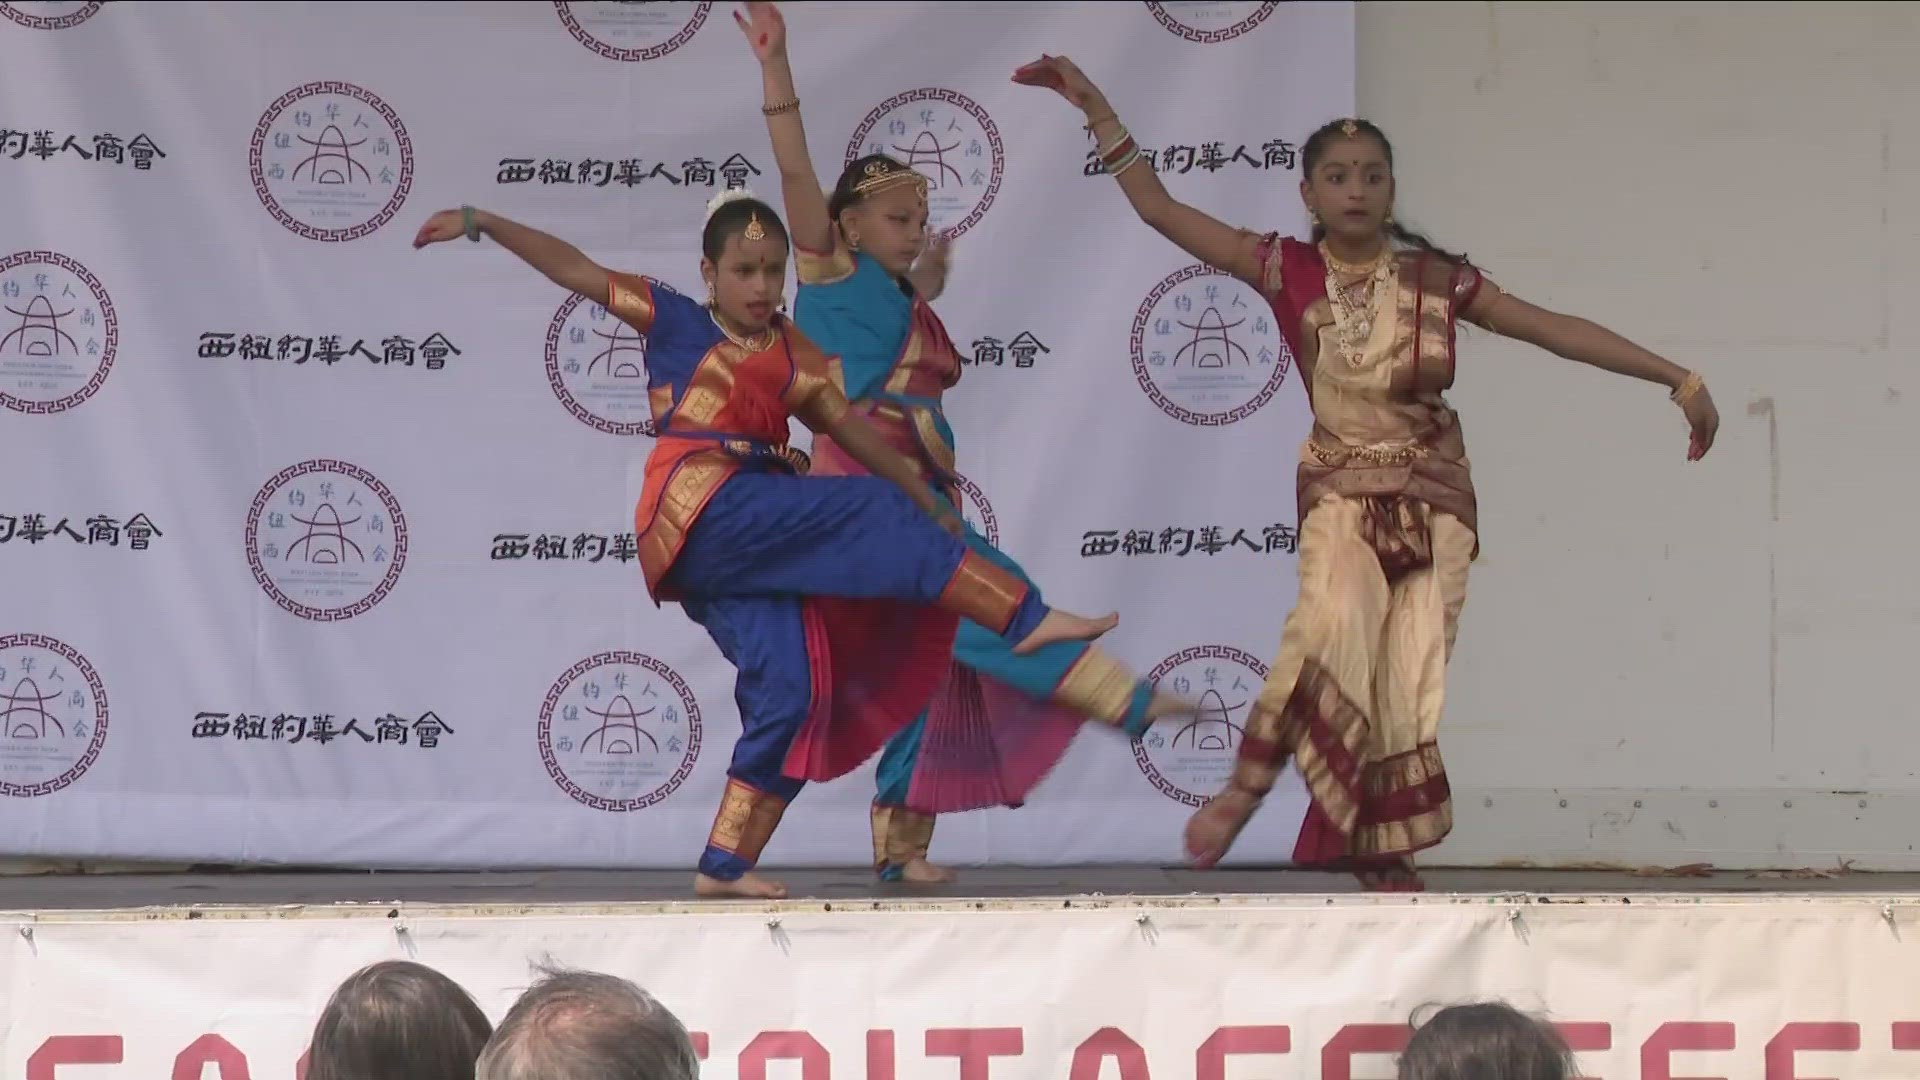 The festival is part of the Asian American and Pacific Islander Heritage month.